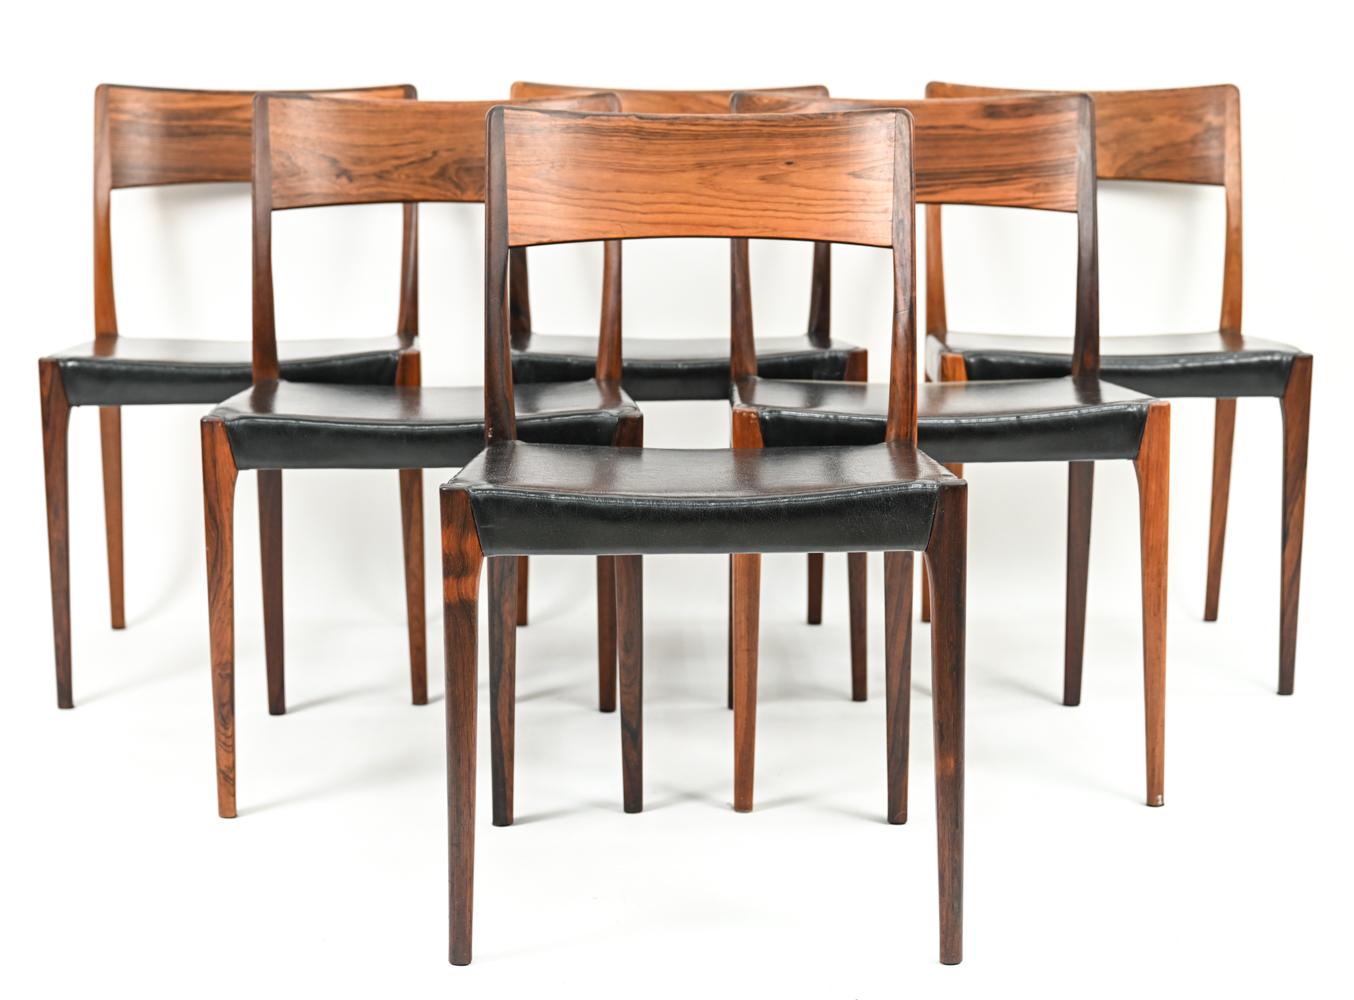 A stunning set of Scandinavian modern dining chairs by Hornslet Mobelfabrik with gorgeous sculptural rosewood frames and black leatherette upholstery, c. 1960's.
Stamped underneath: Hornslet Mobelfabrik.